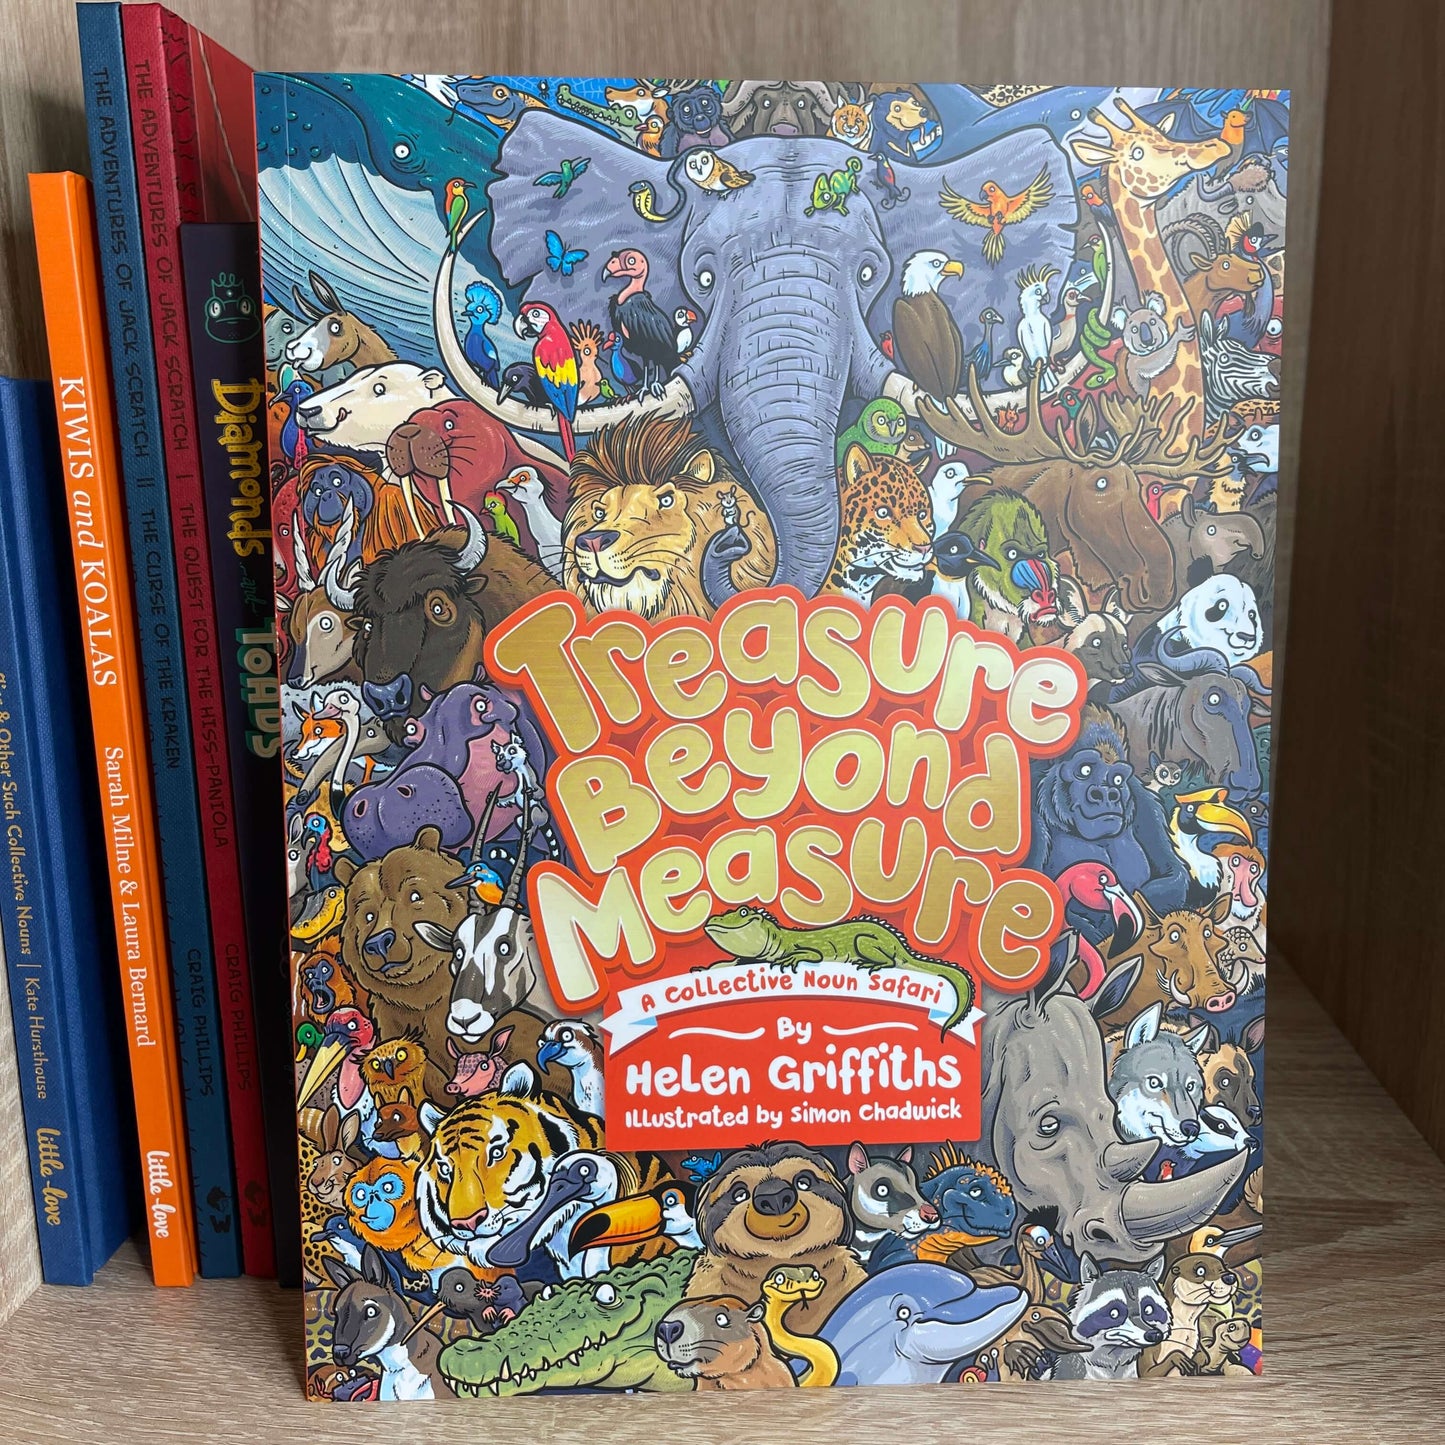 Childrens book Treasure Beyond Measure by Helen Griffiths.